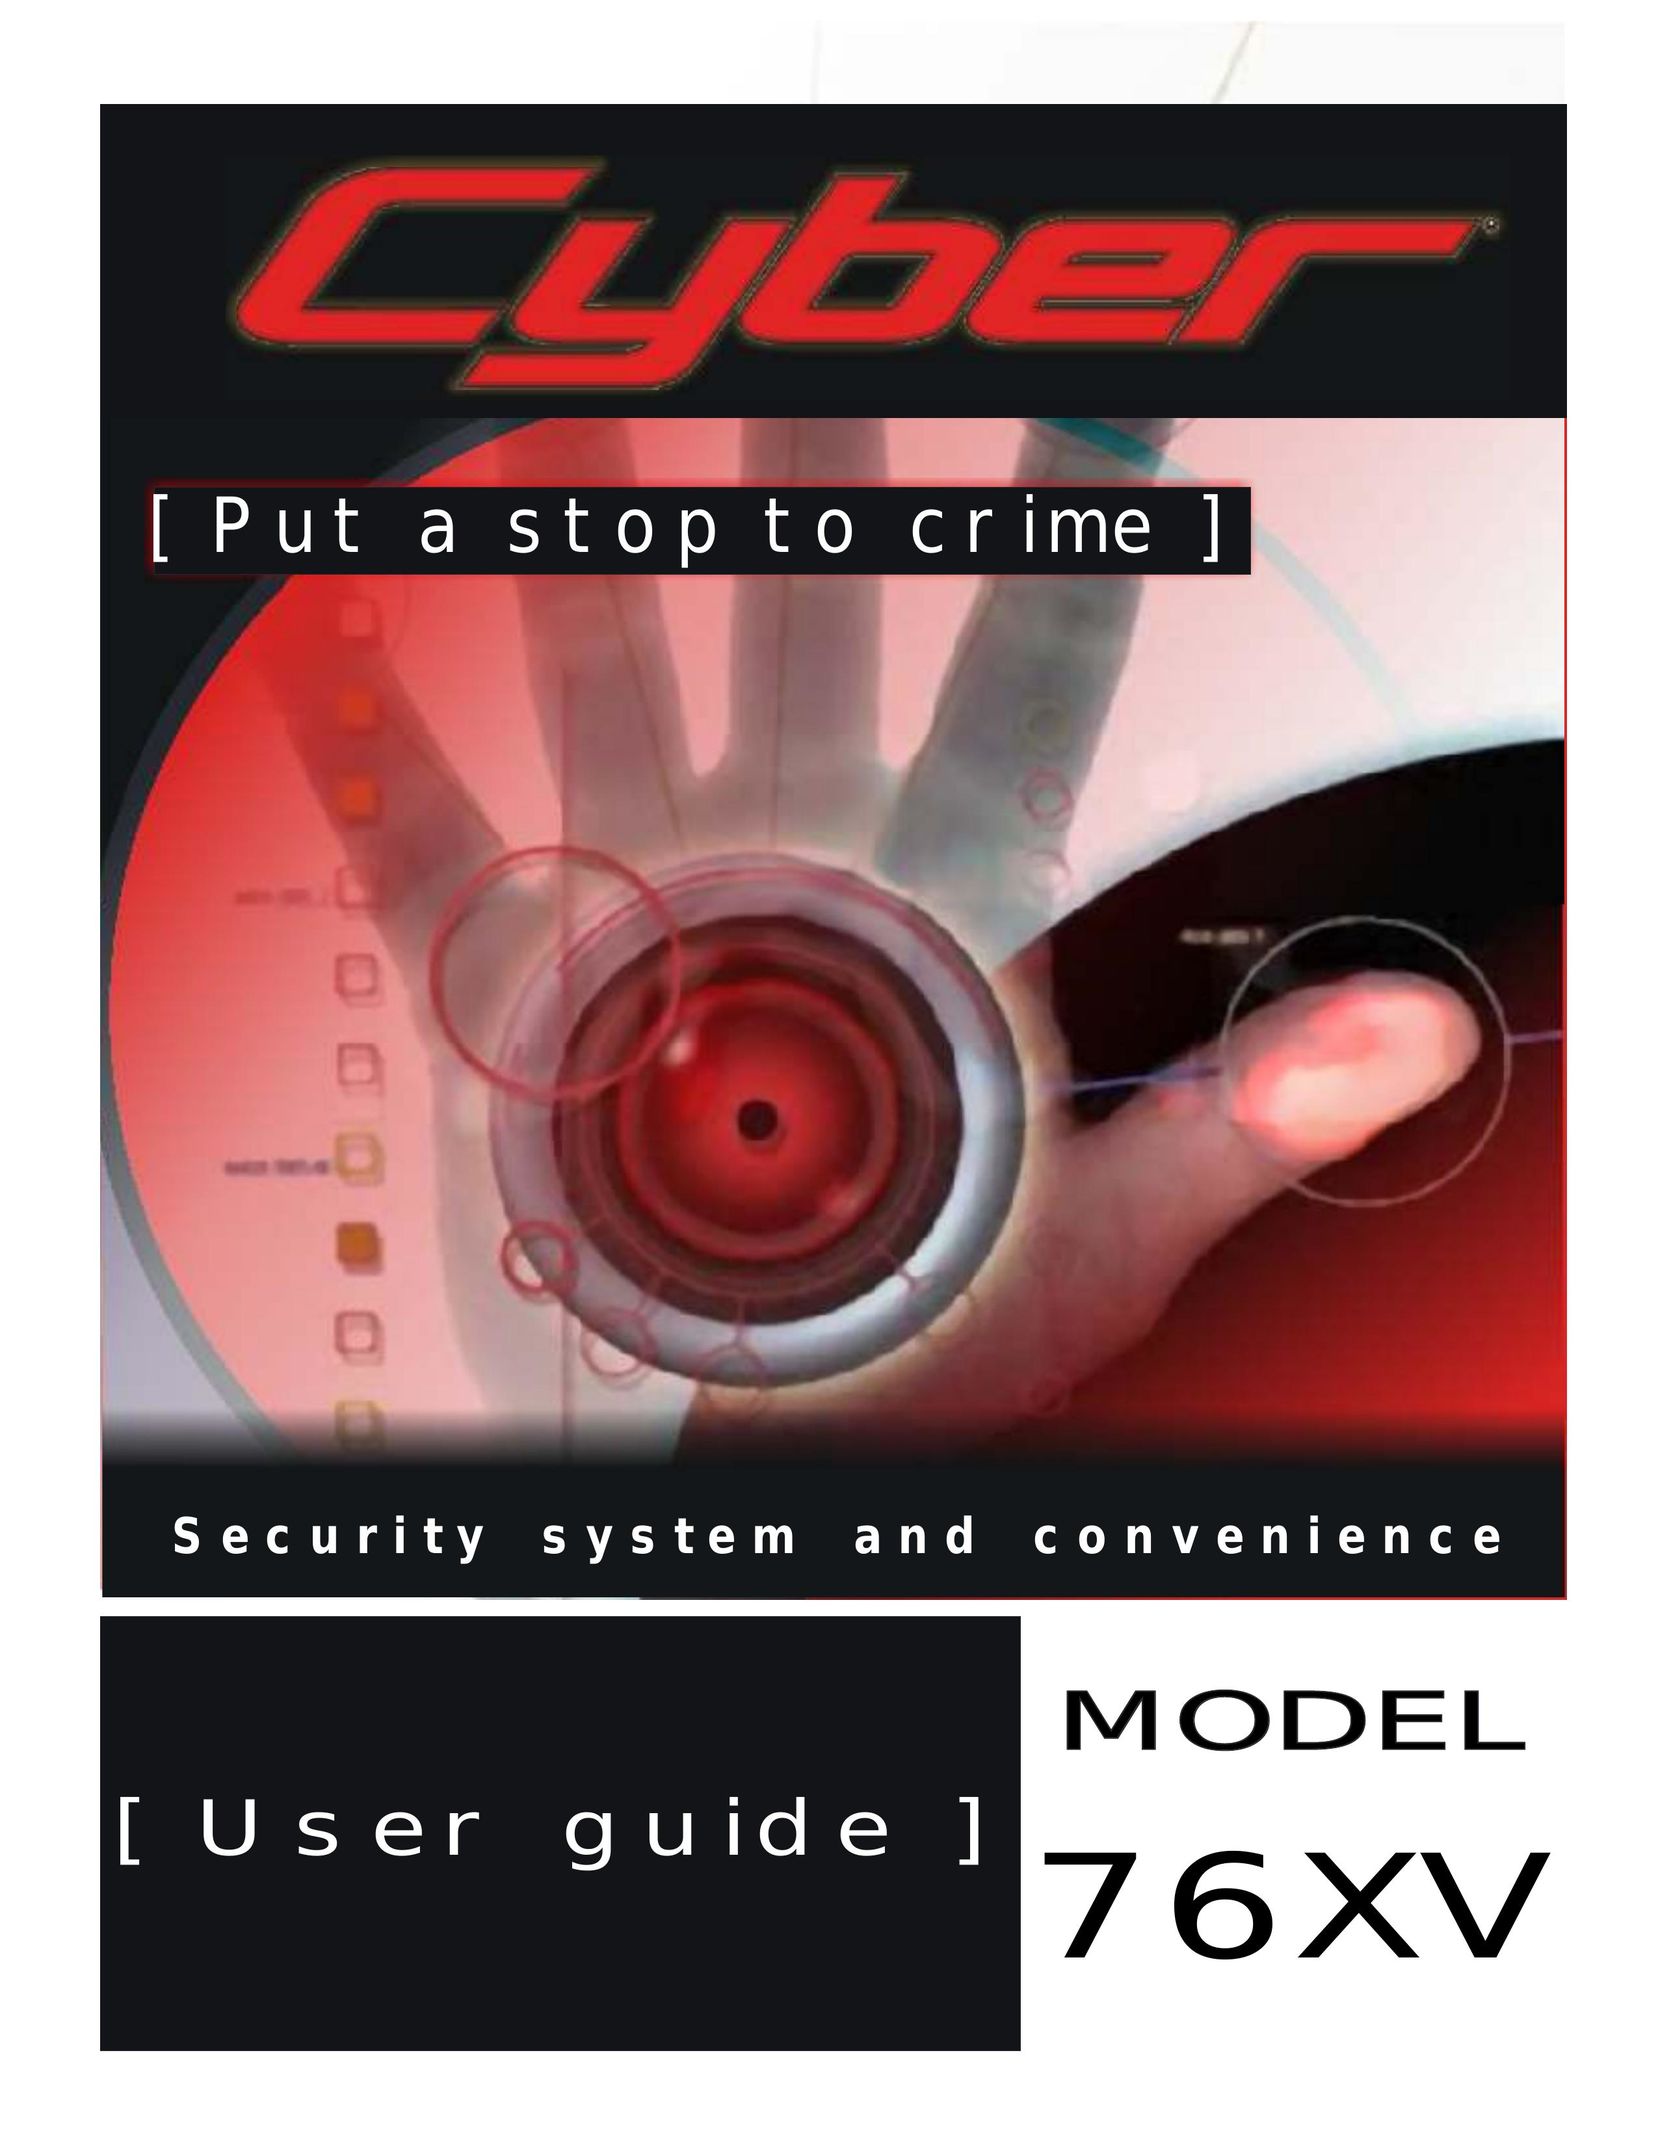 CyberHome Entertainment 76XV Home Security System User Manual